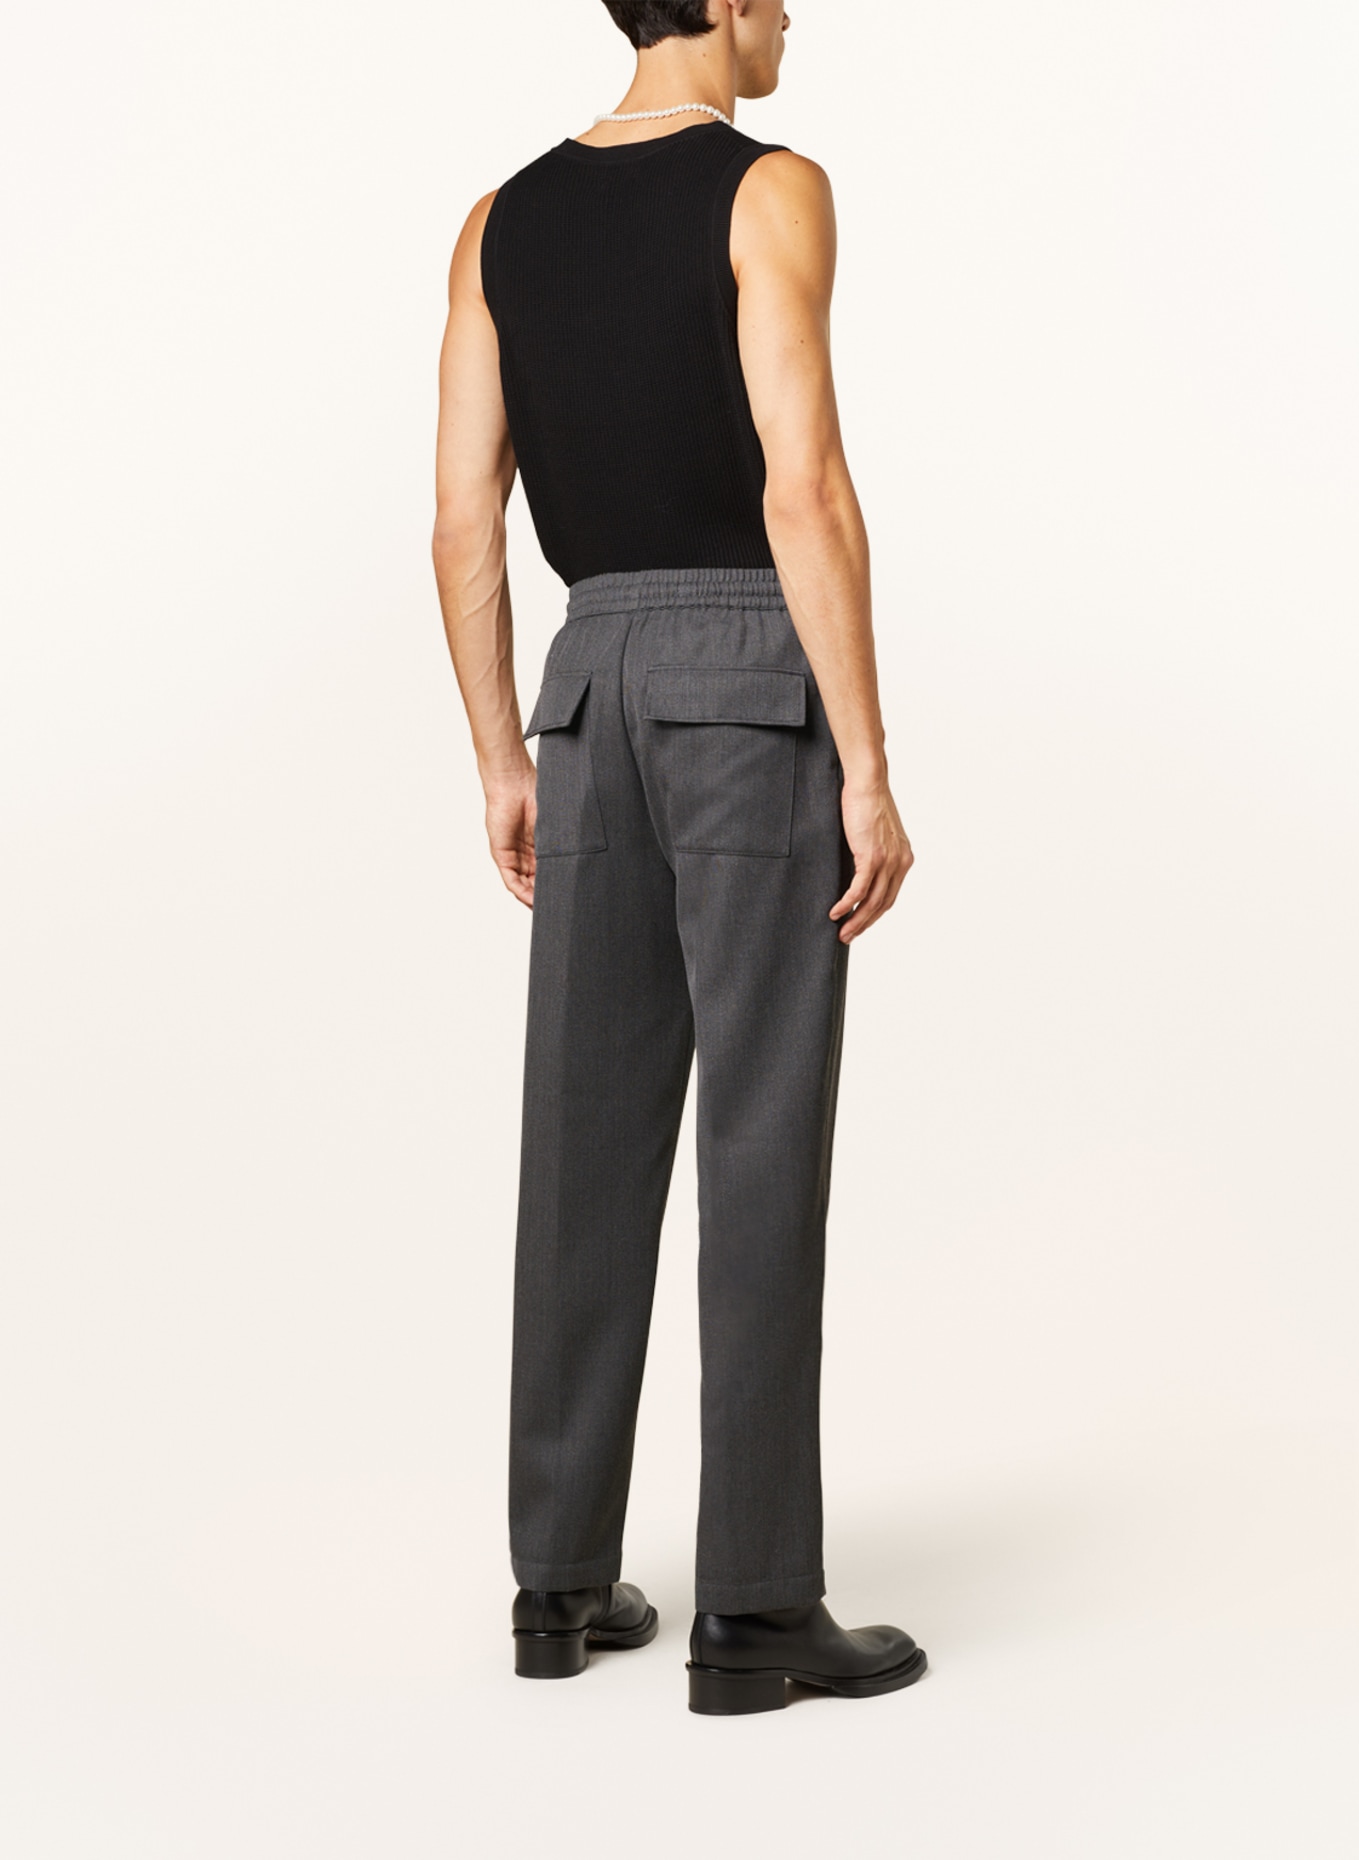 RÓHE Pants in jogger style, Color: GRAY (Image 3)